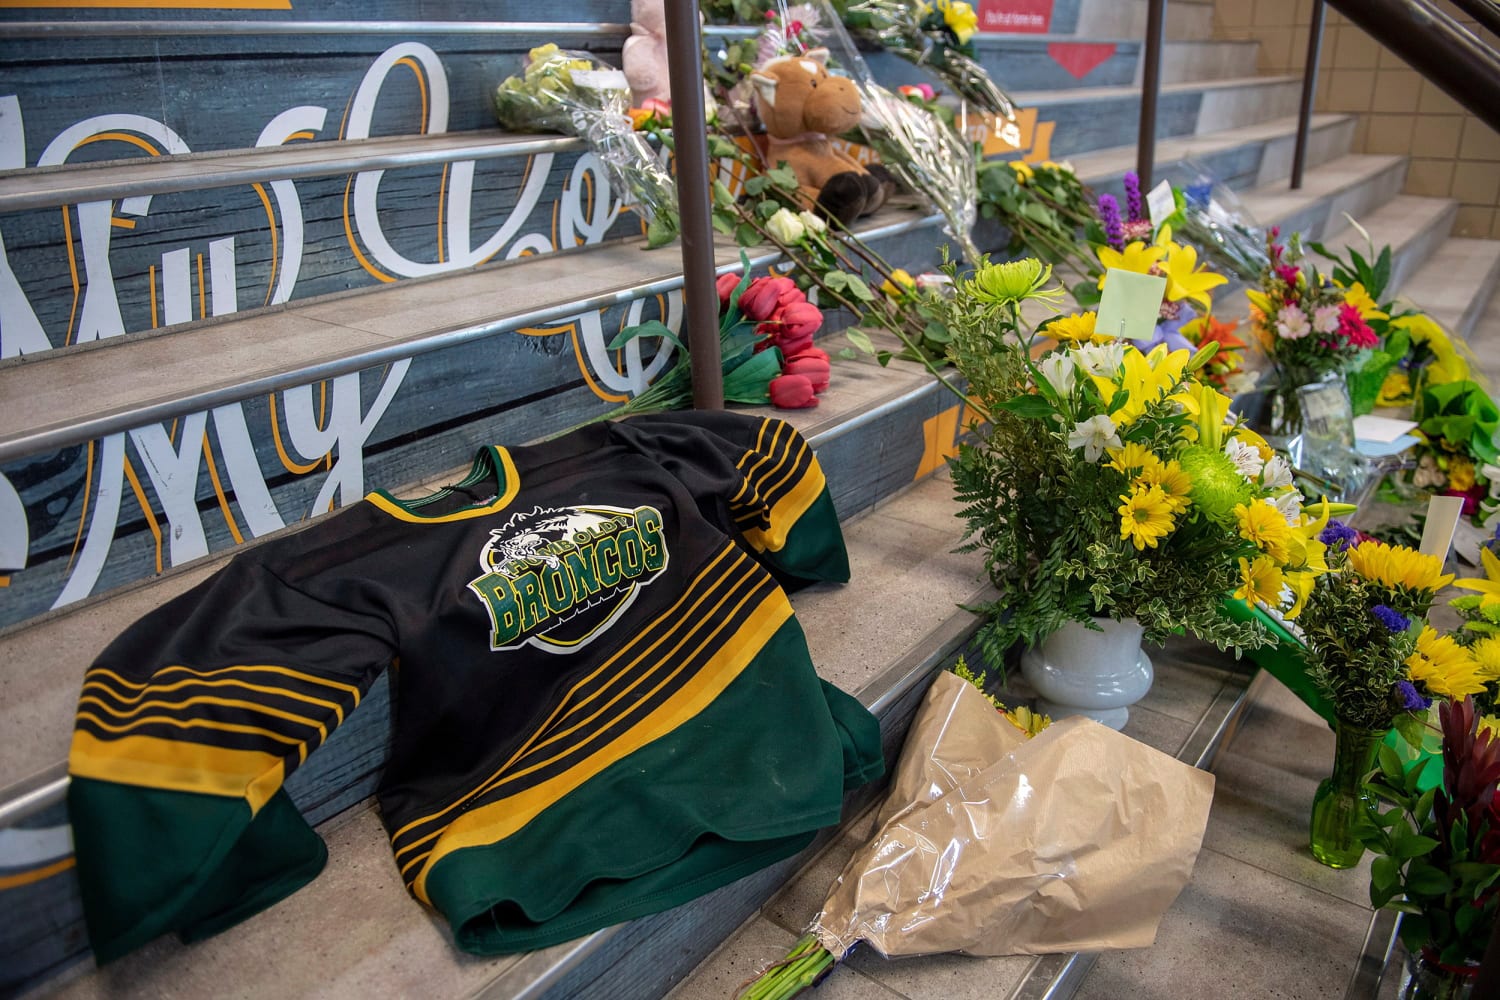 Terrible tragedy': Death toll from Canada junior ice hockey bus